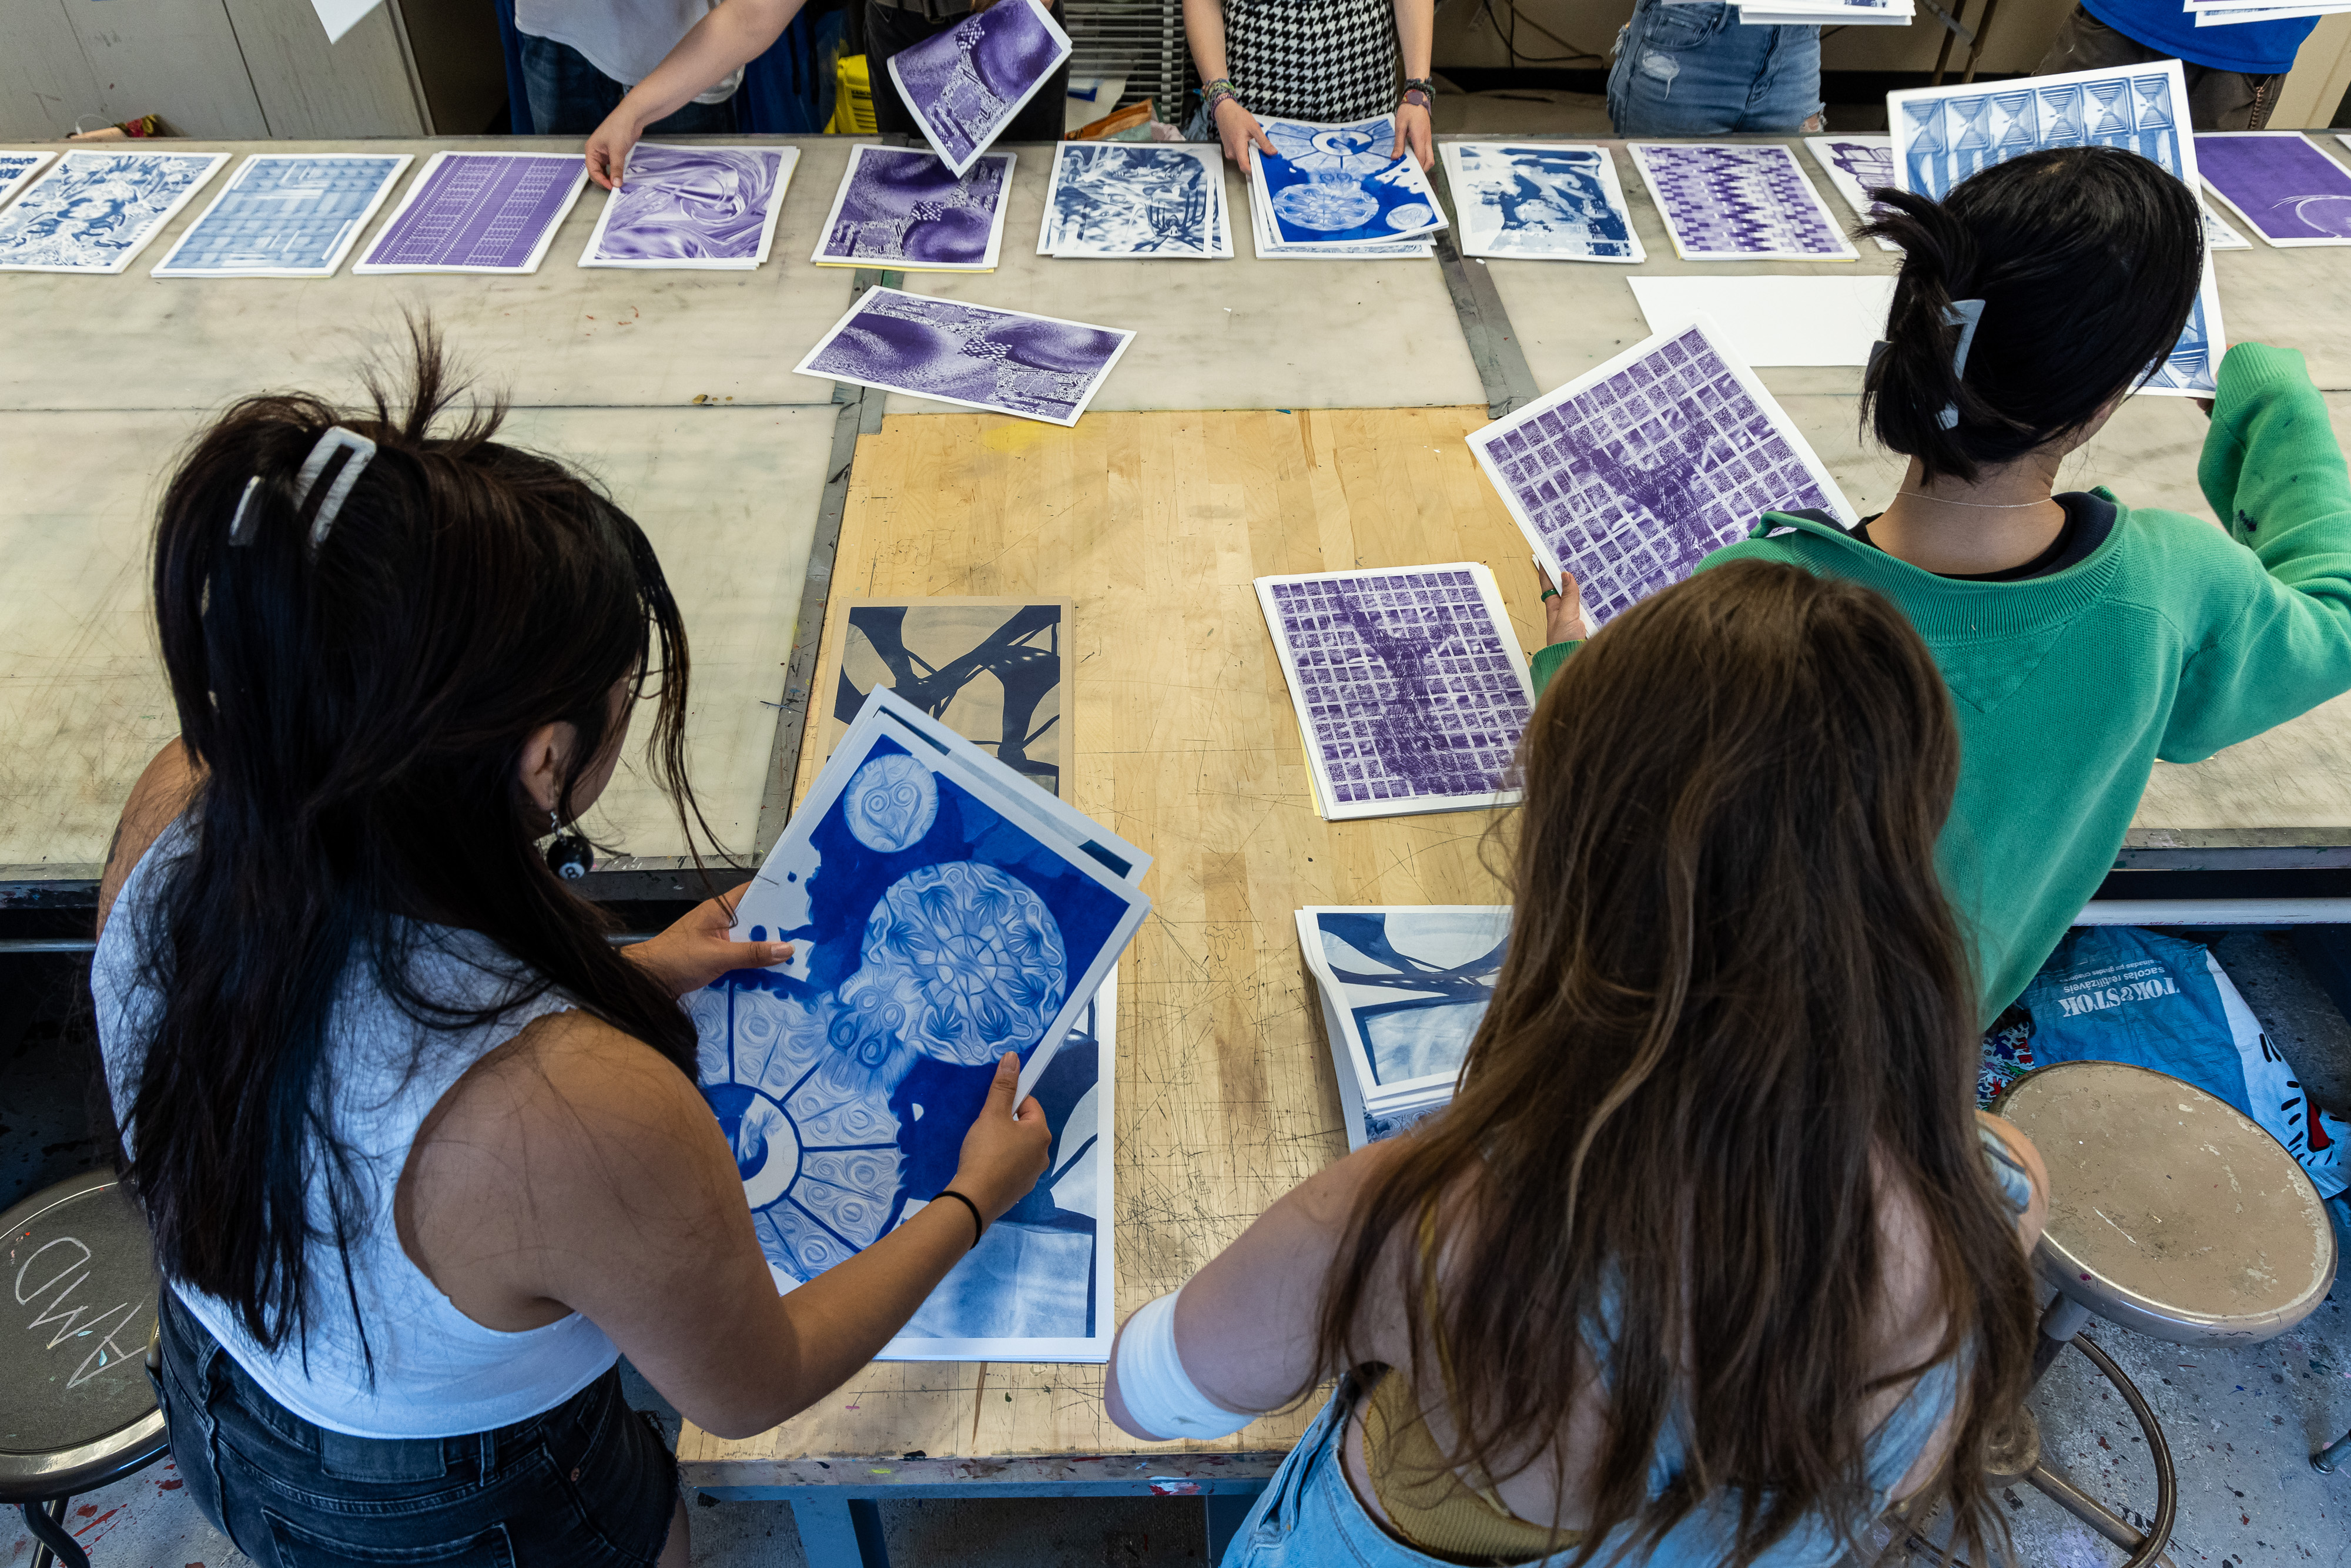 A photo taken from behind three students as they hold up a few of the abstract prints on the table